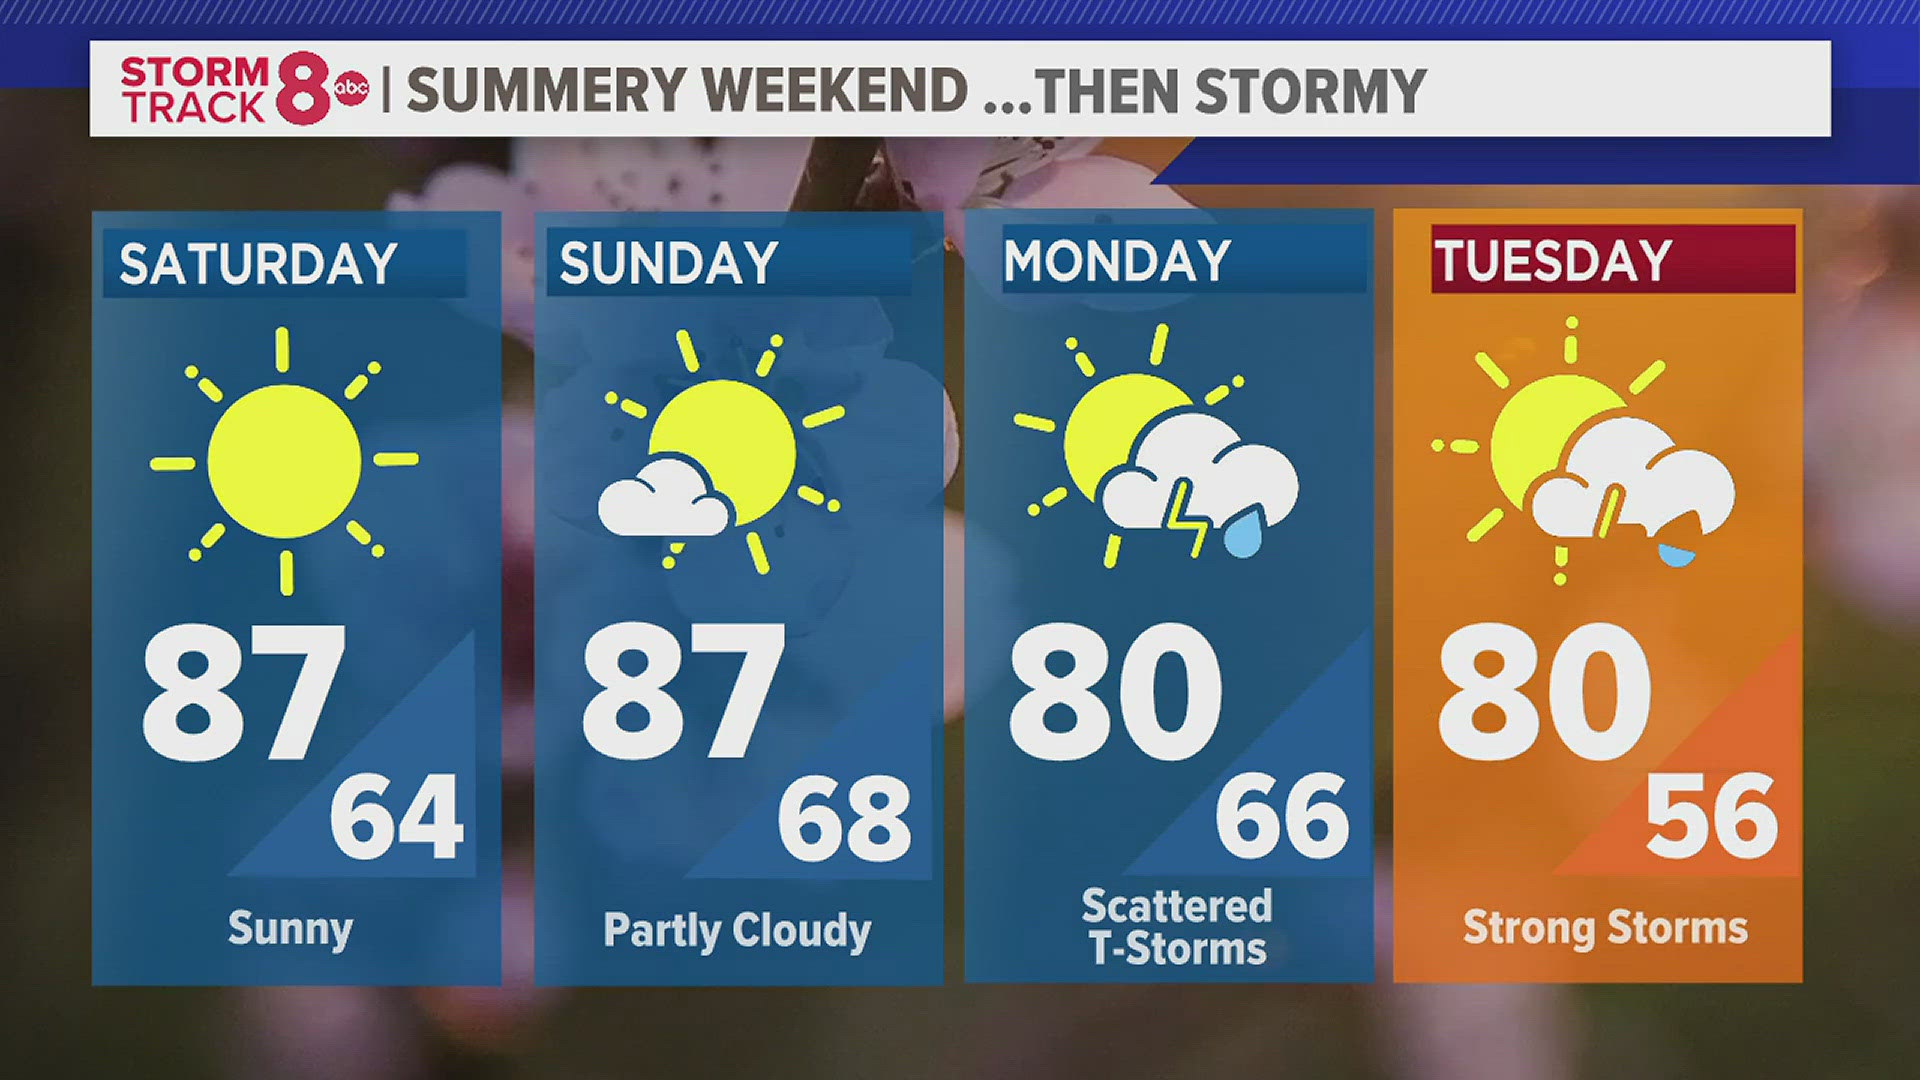 Summery weekend with scattered storms to start the new week